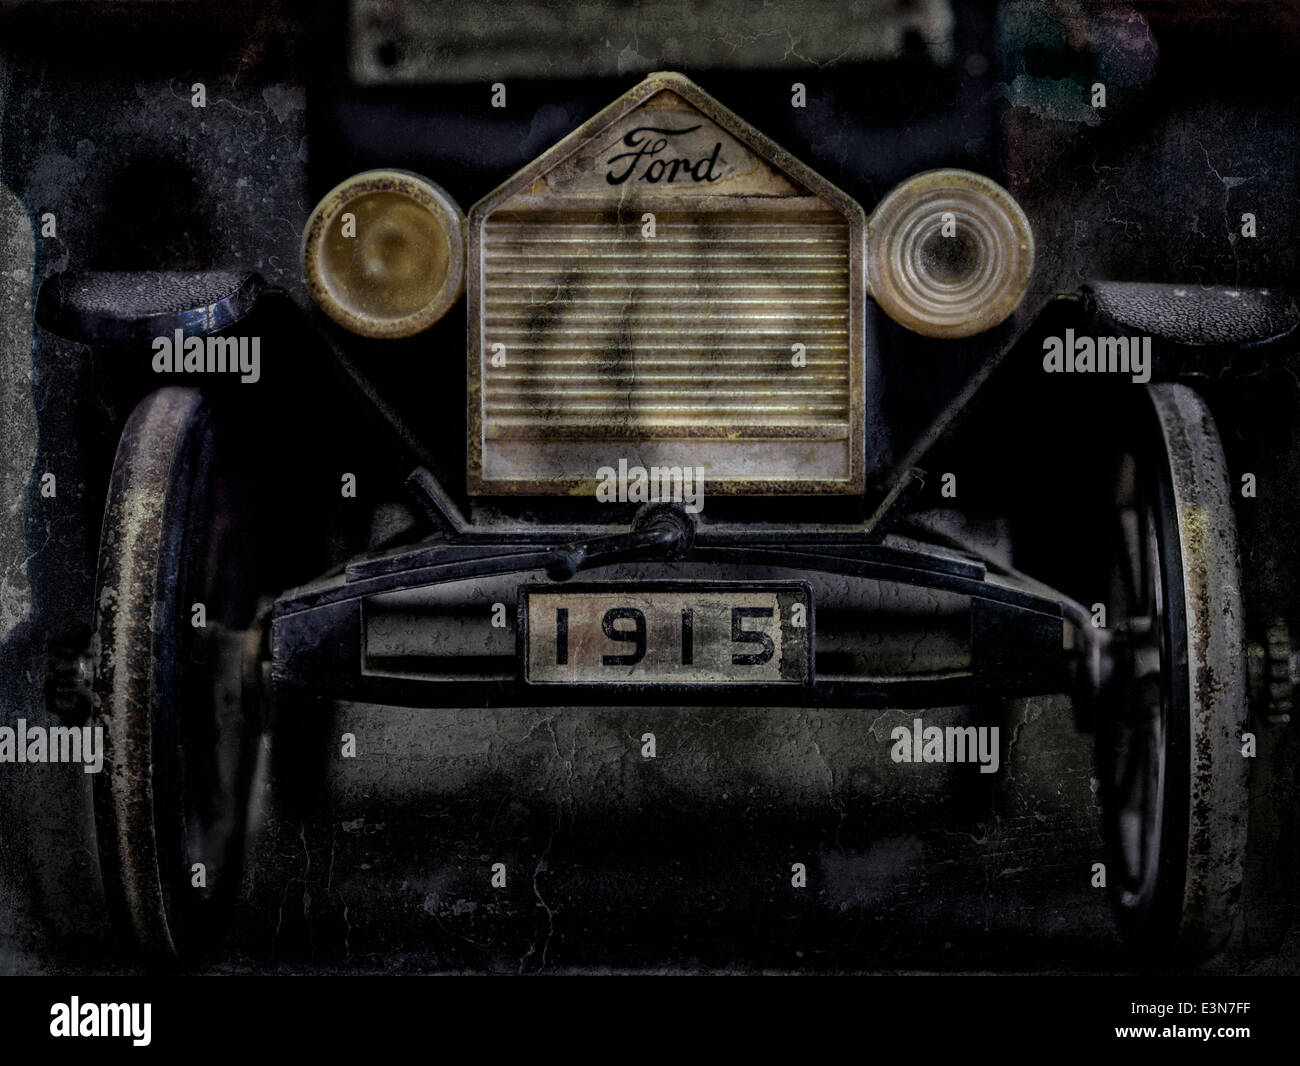 Ford Model T toy car. Painterly and grunge effect image of a Ford Model T toy car. Stock Photo